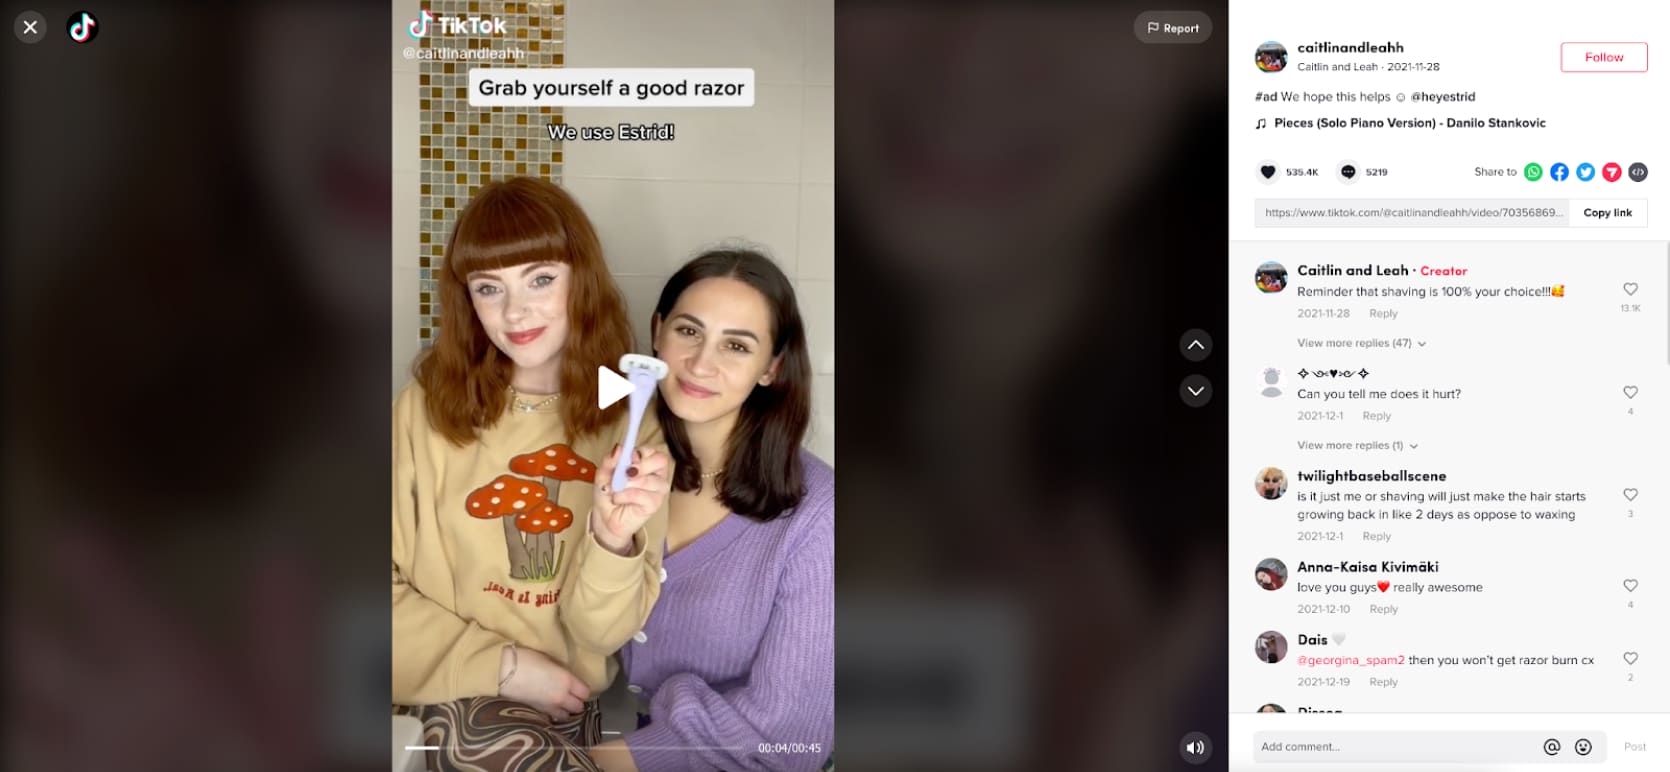 Influencers Caitlin and Leahh promote products on TikTok